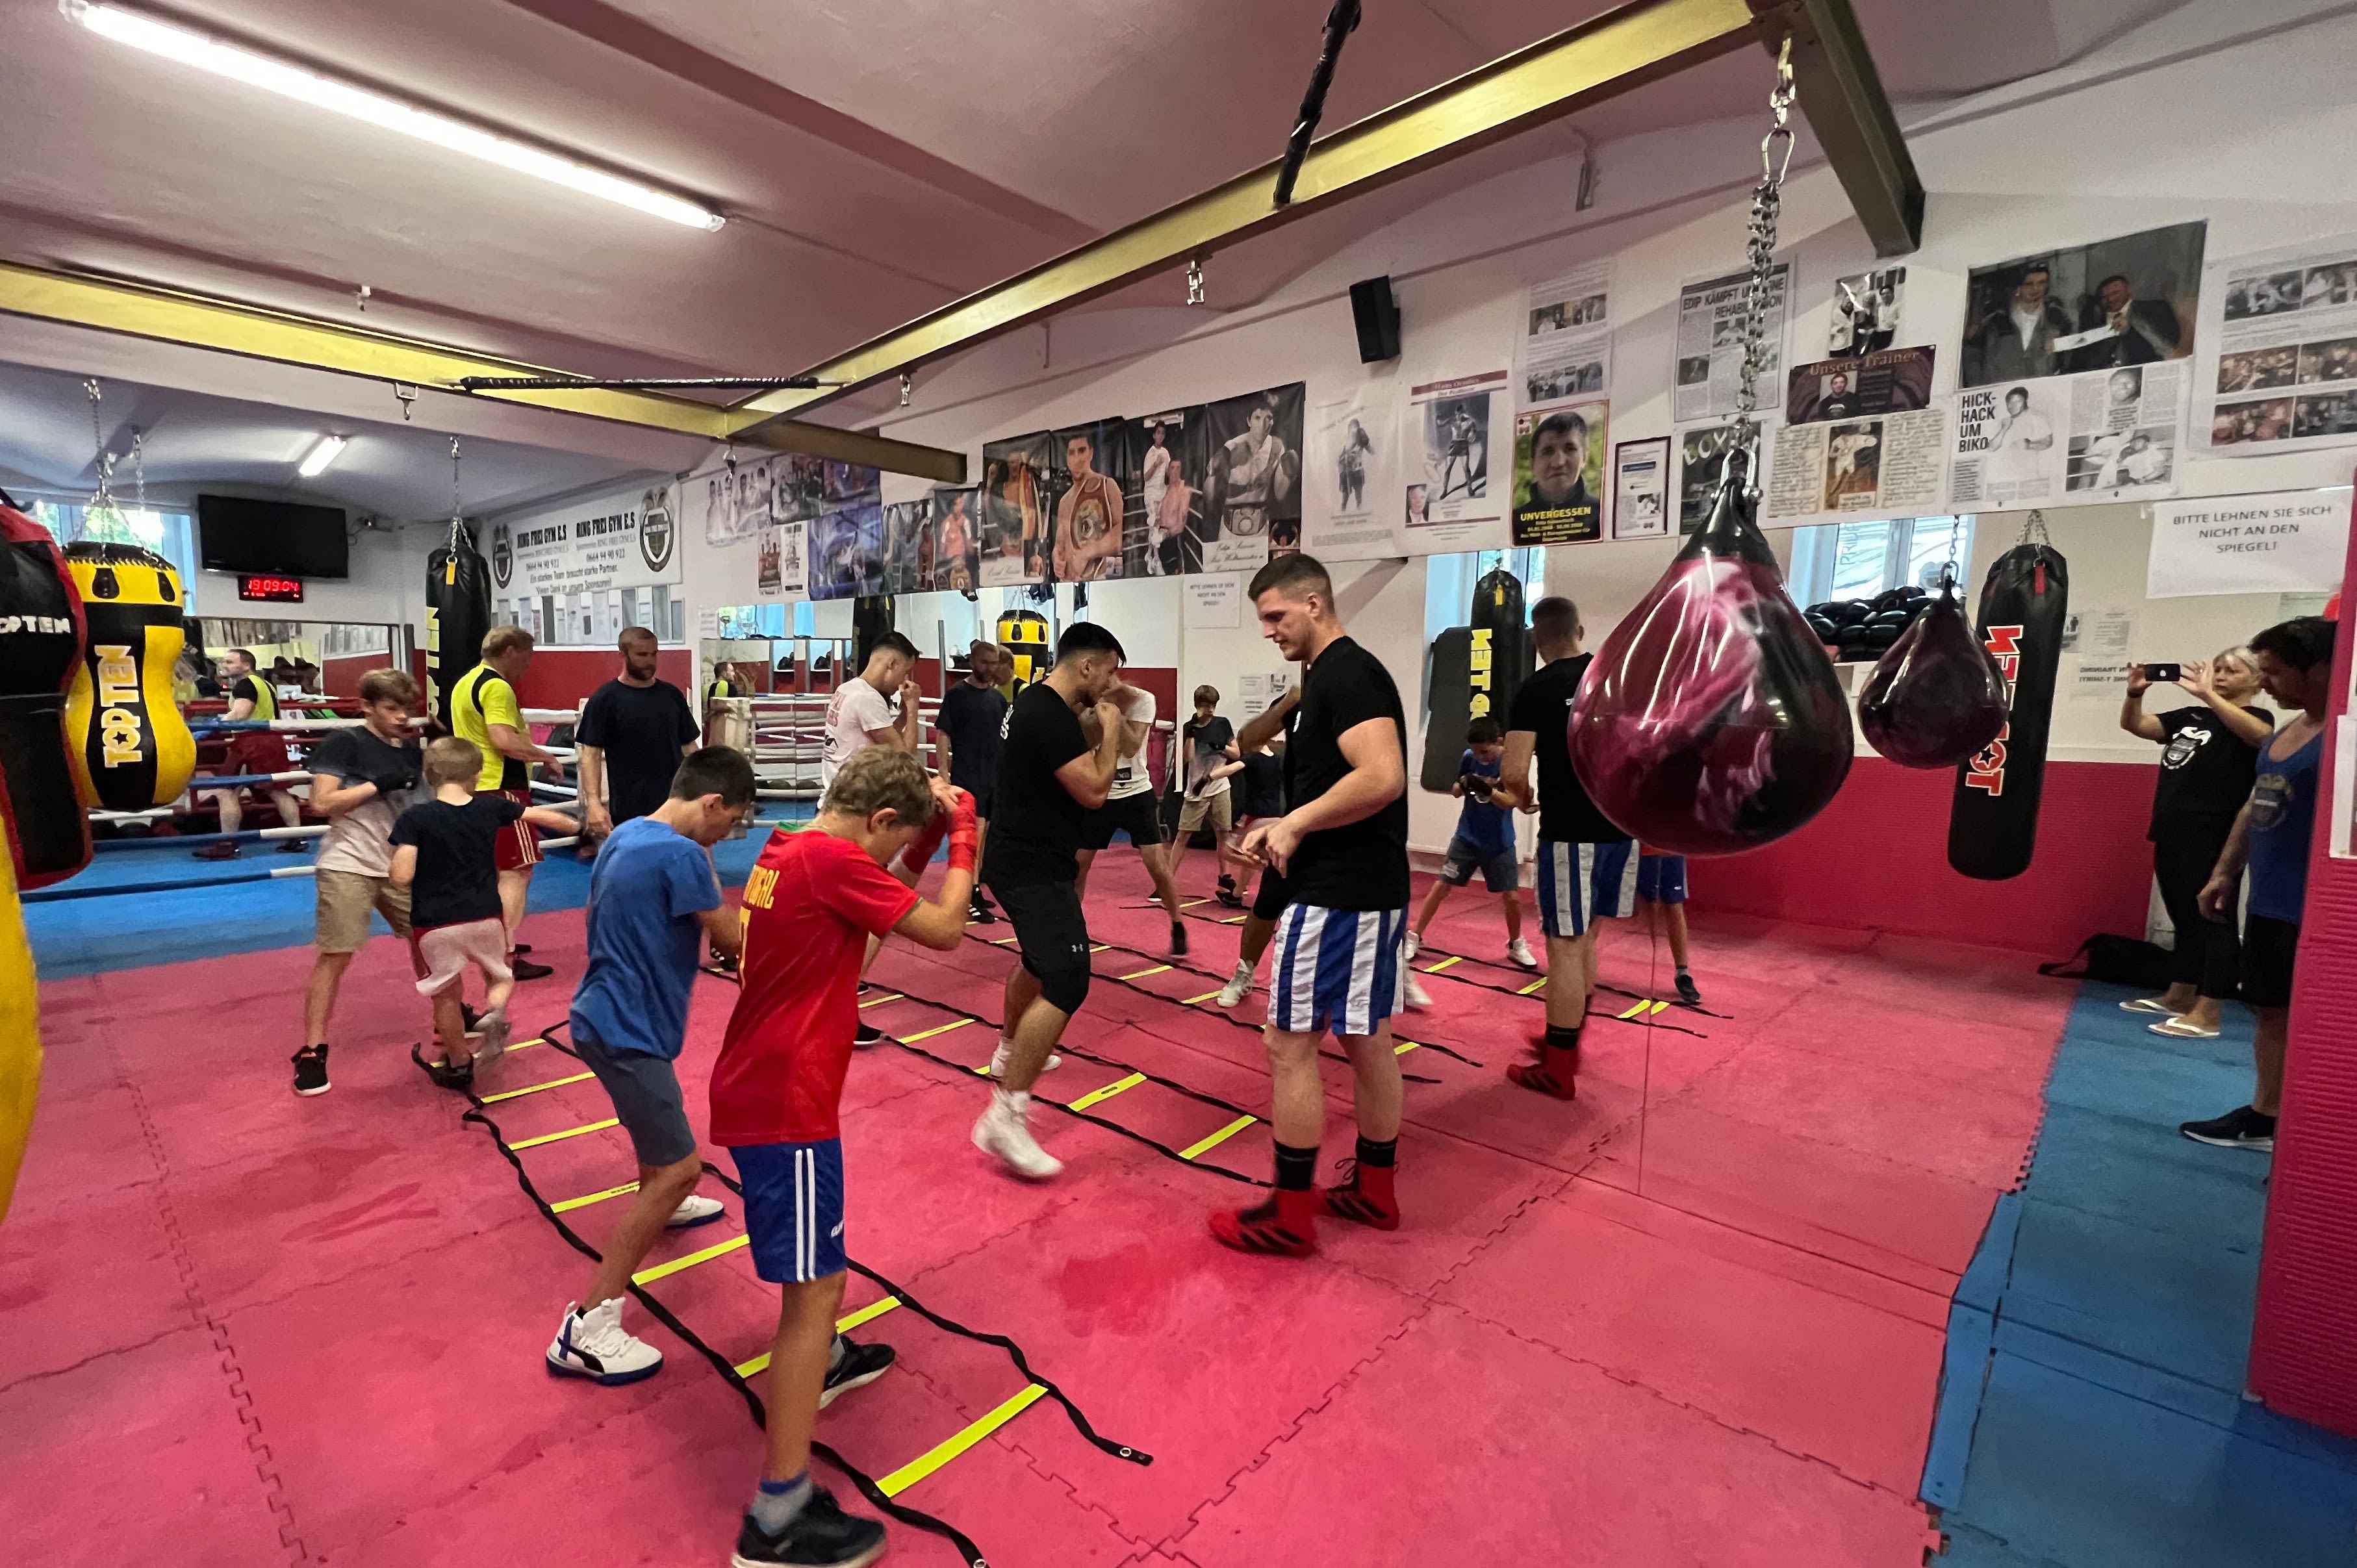 Kolibrie Arab enthousiast Ring Frei Gym: Read Reviews and Book Classes on ClassPass